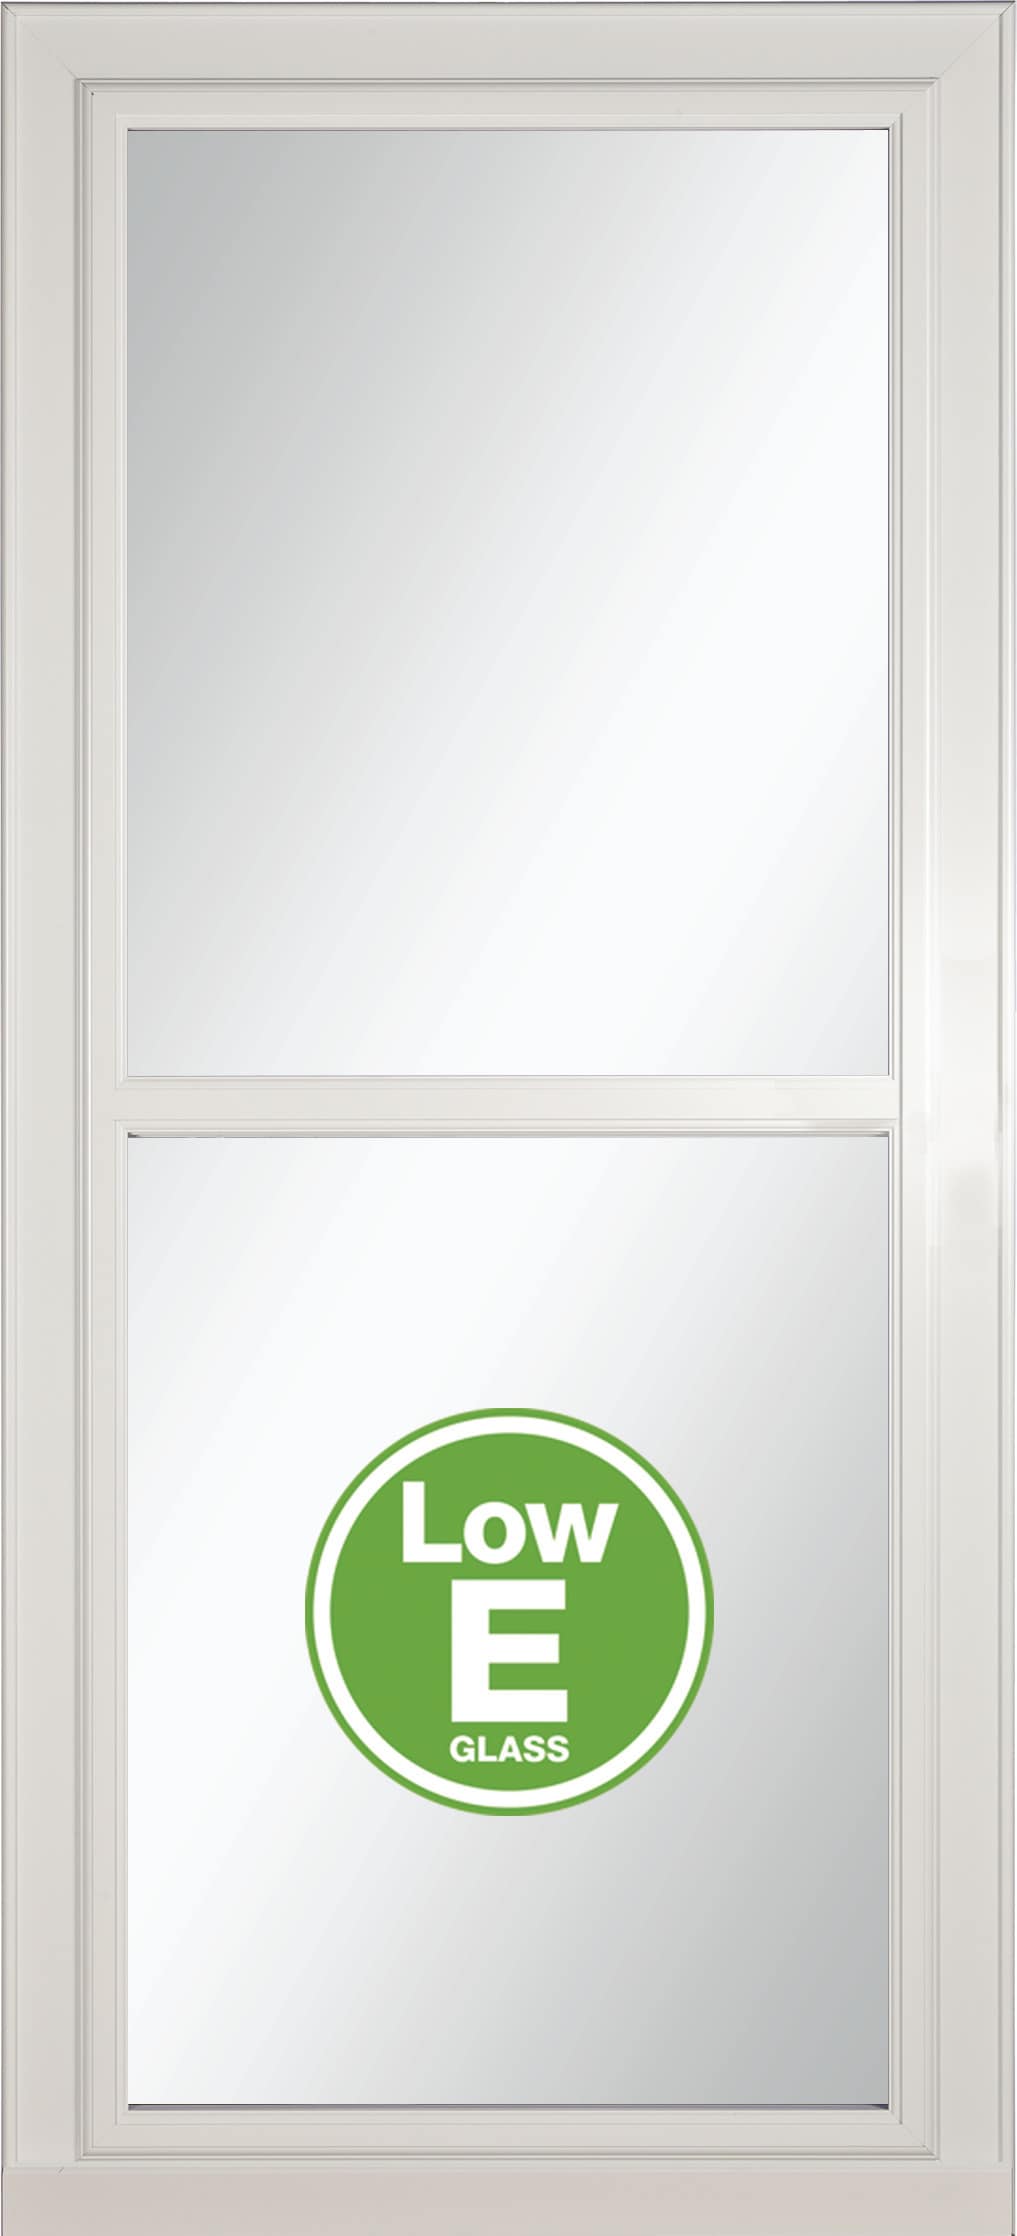 Tradewinds Selection Low-E 32-in x 81-in White Full-view Retractable Screen Aluminum Storm Door | - LARSON 14604031E